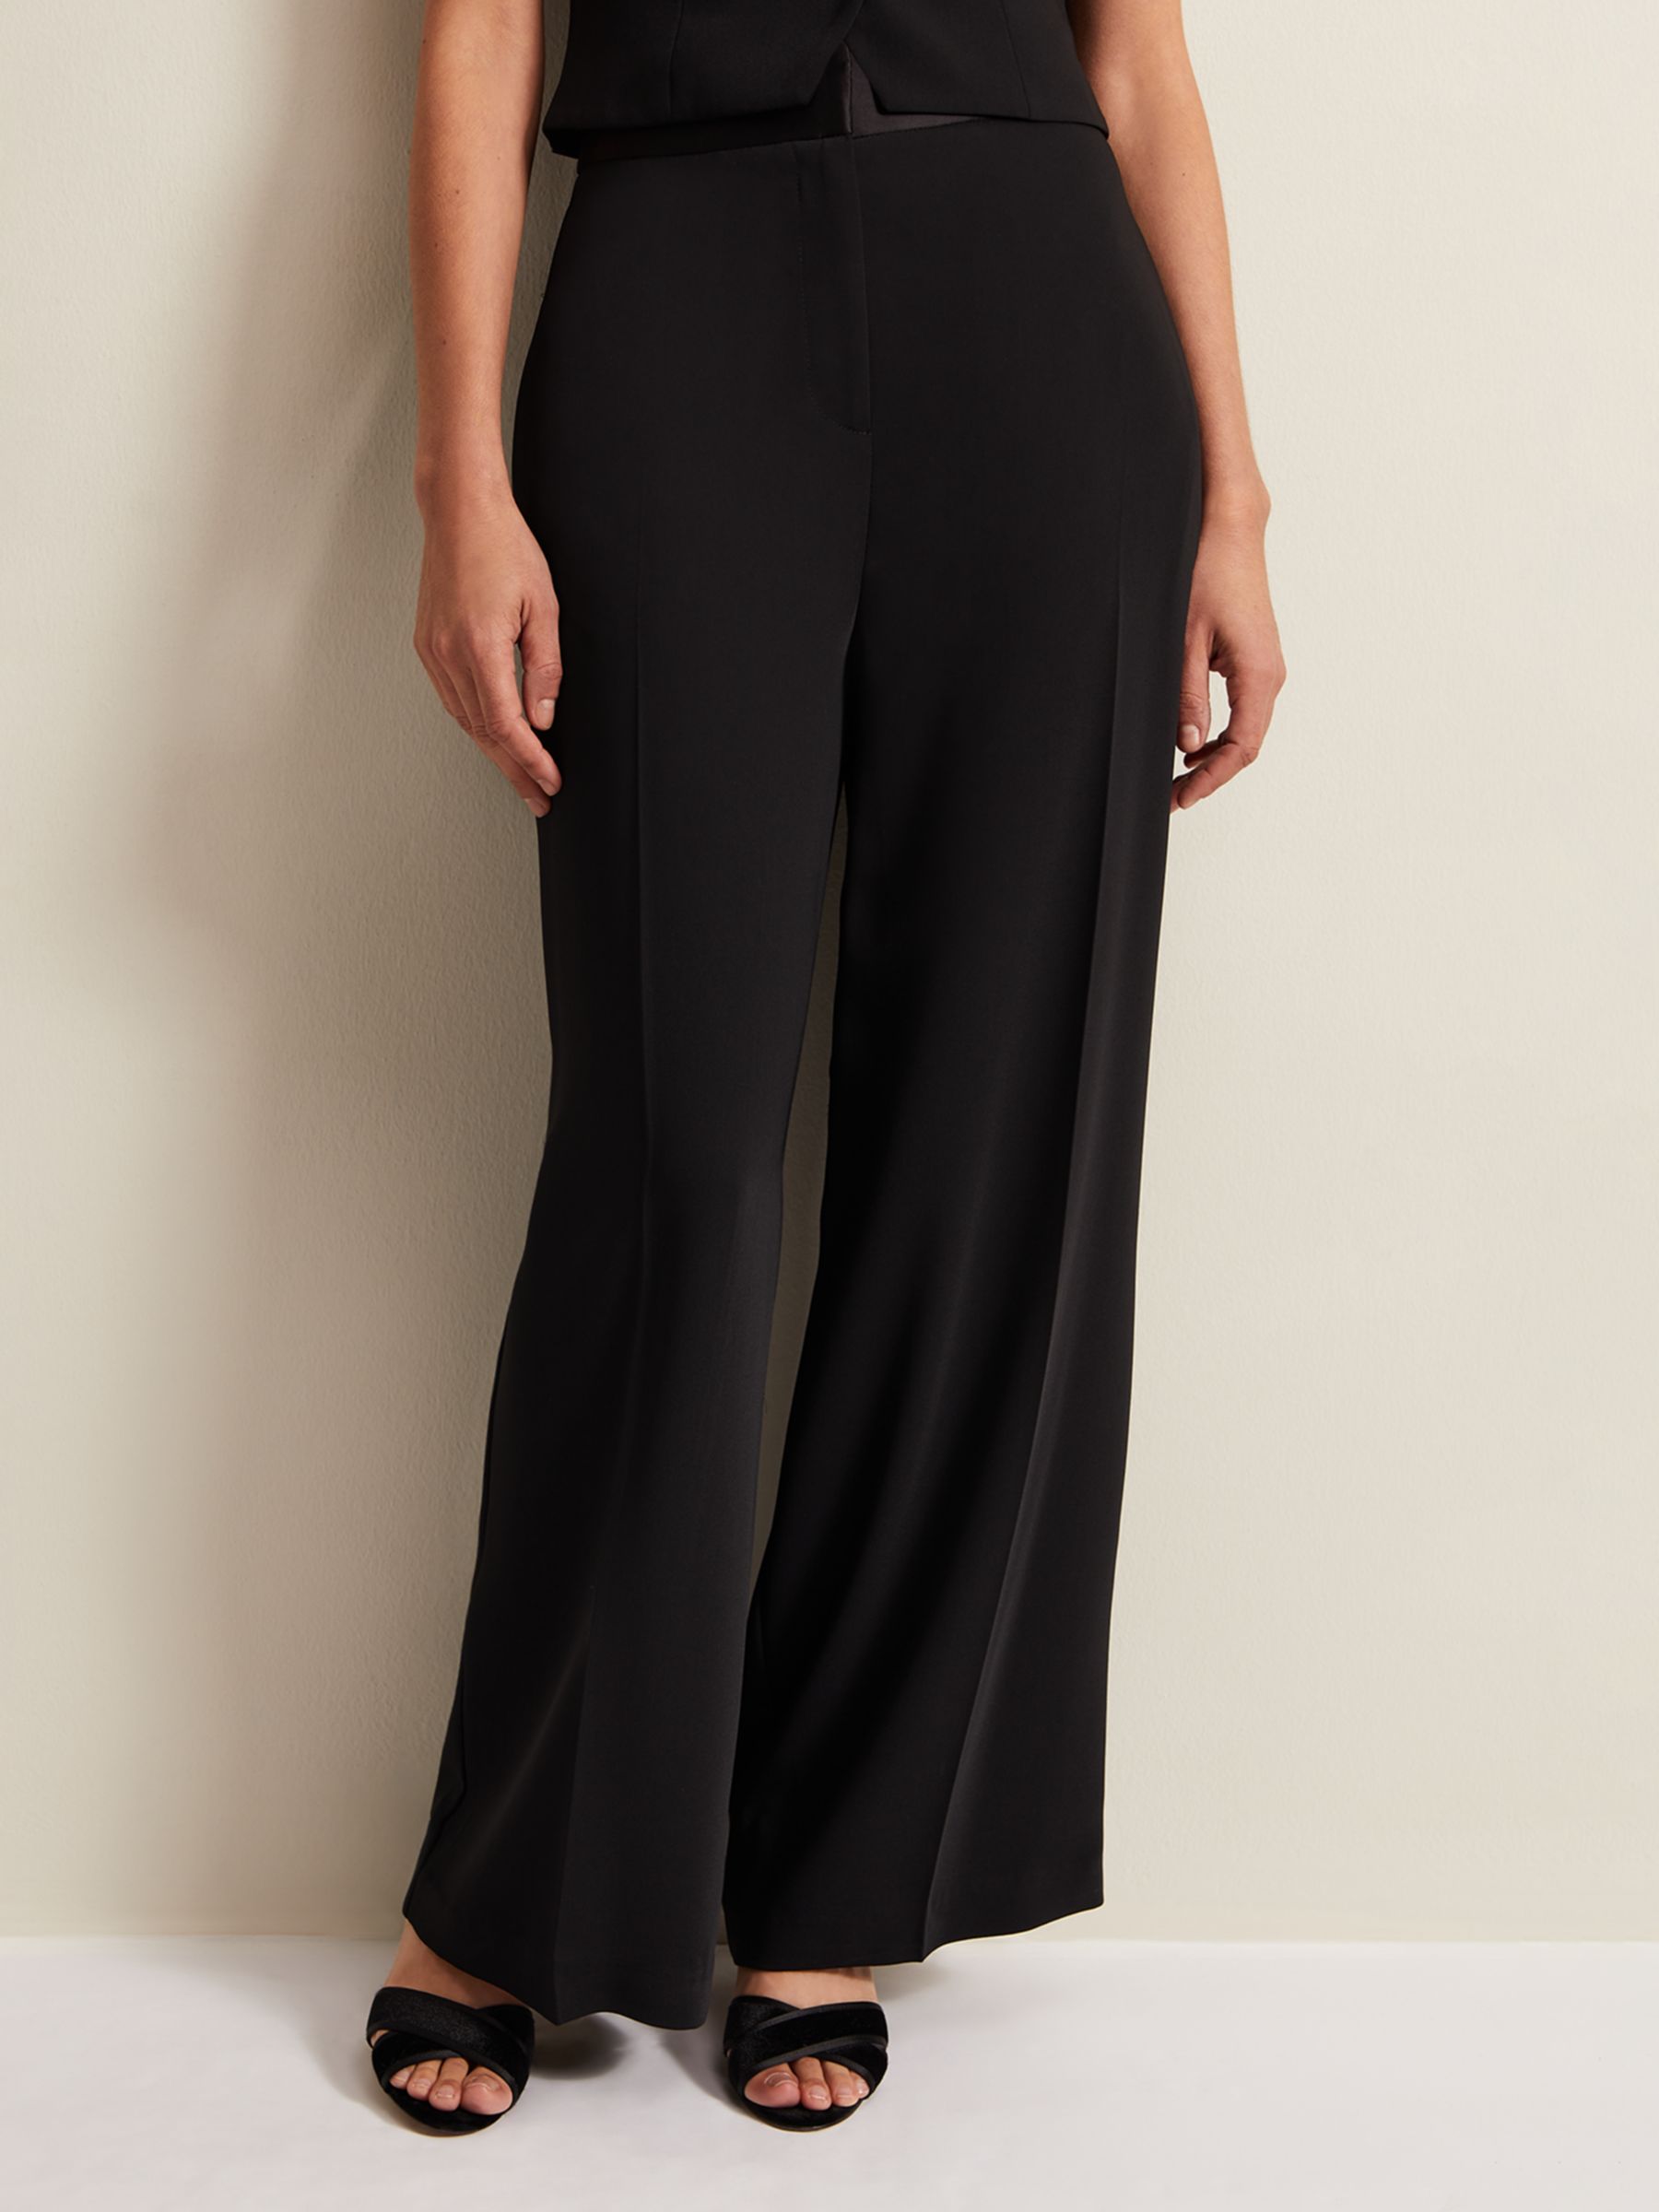 Black Lux Wide Leg Trousers - Sale from Yumi UK